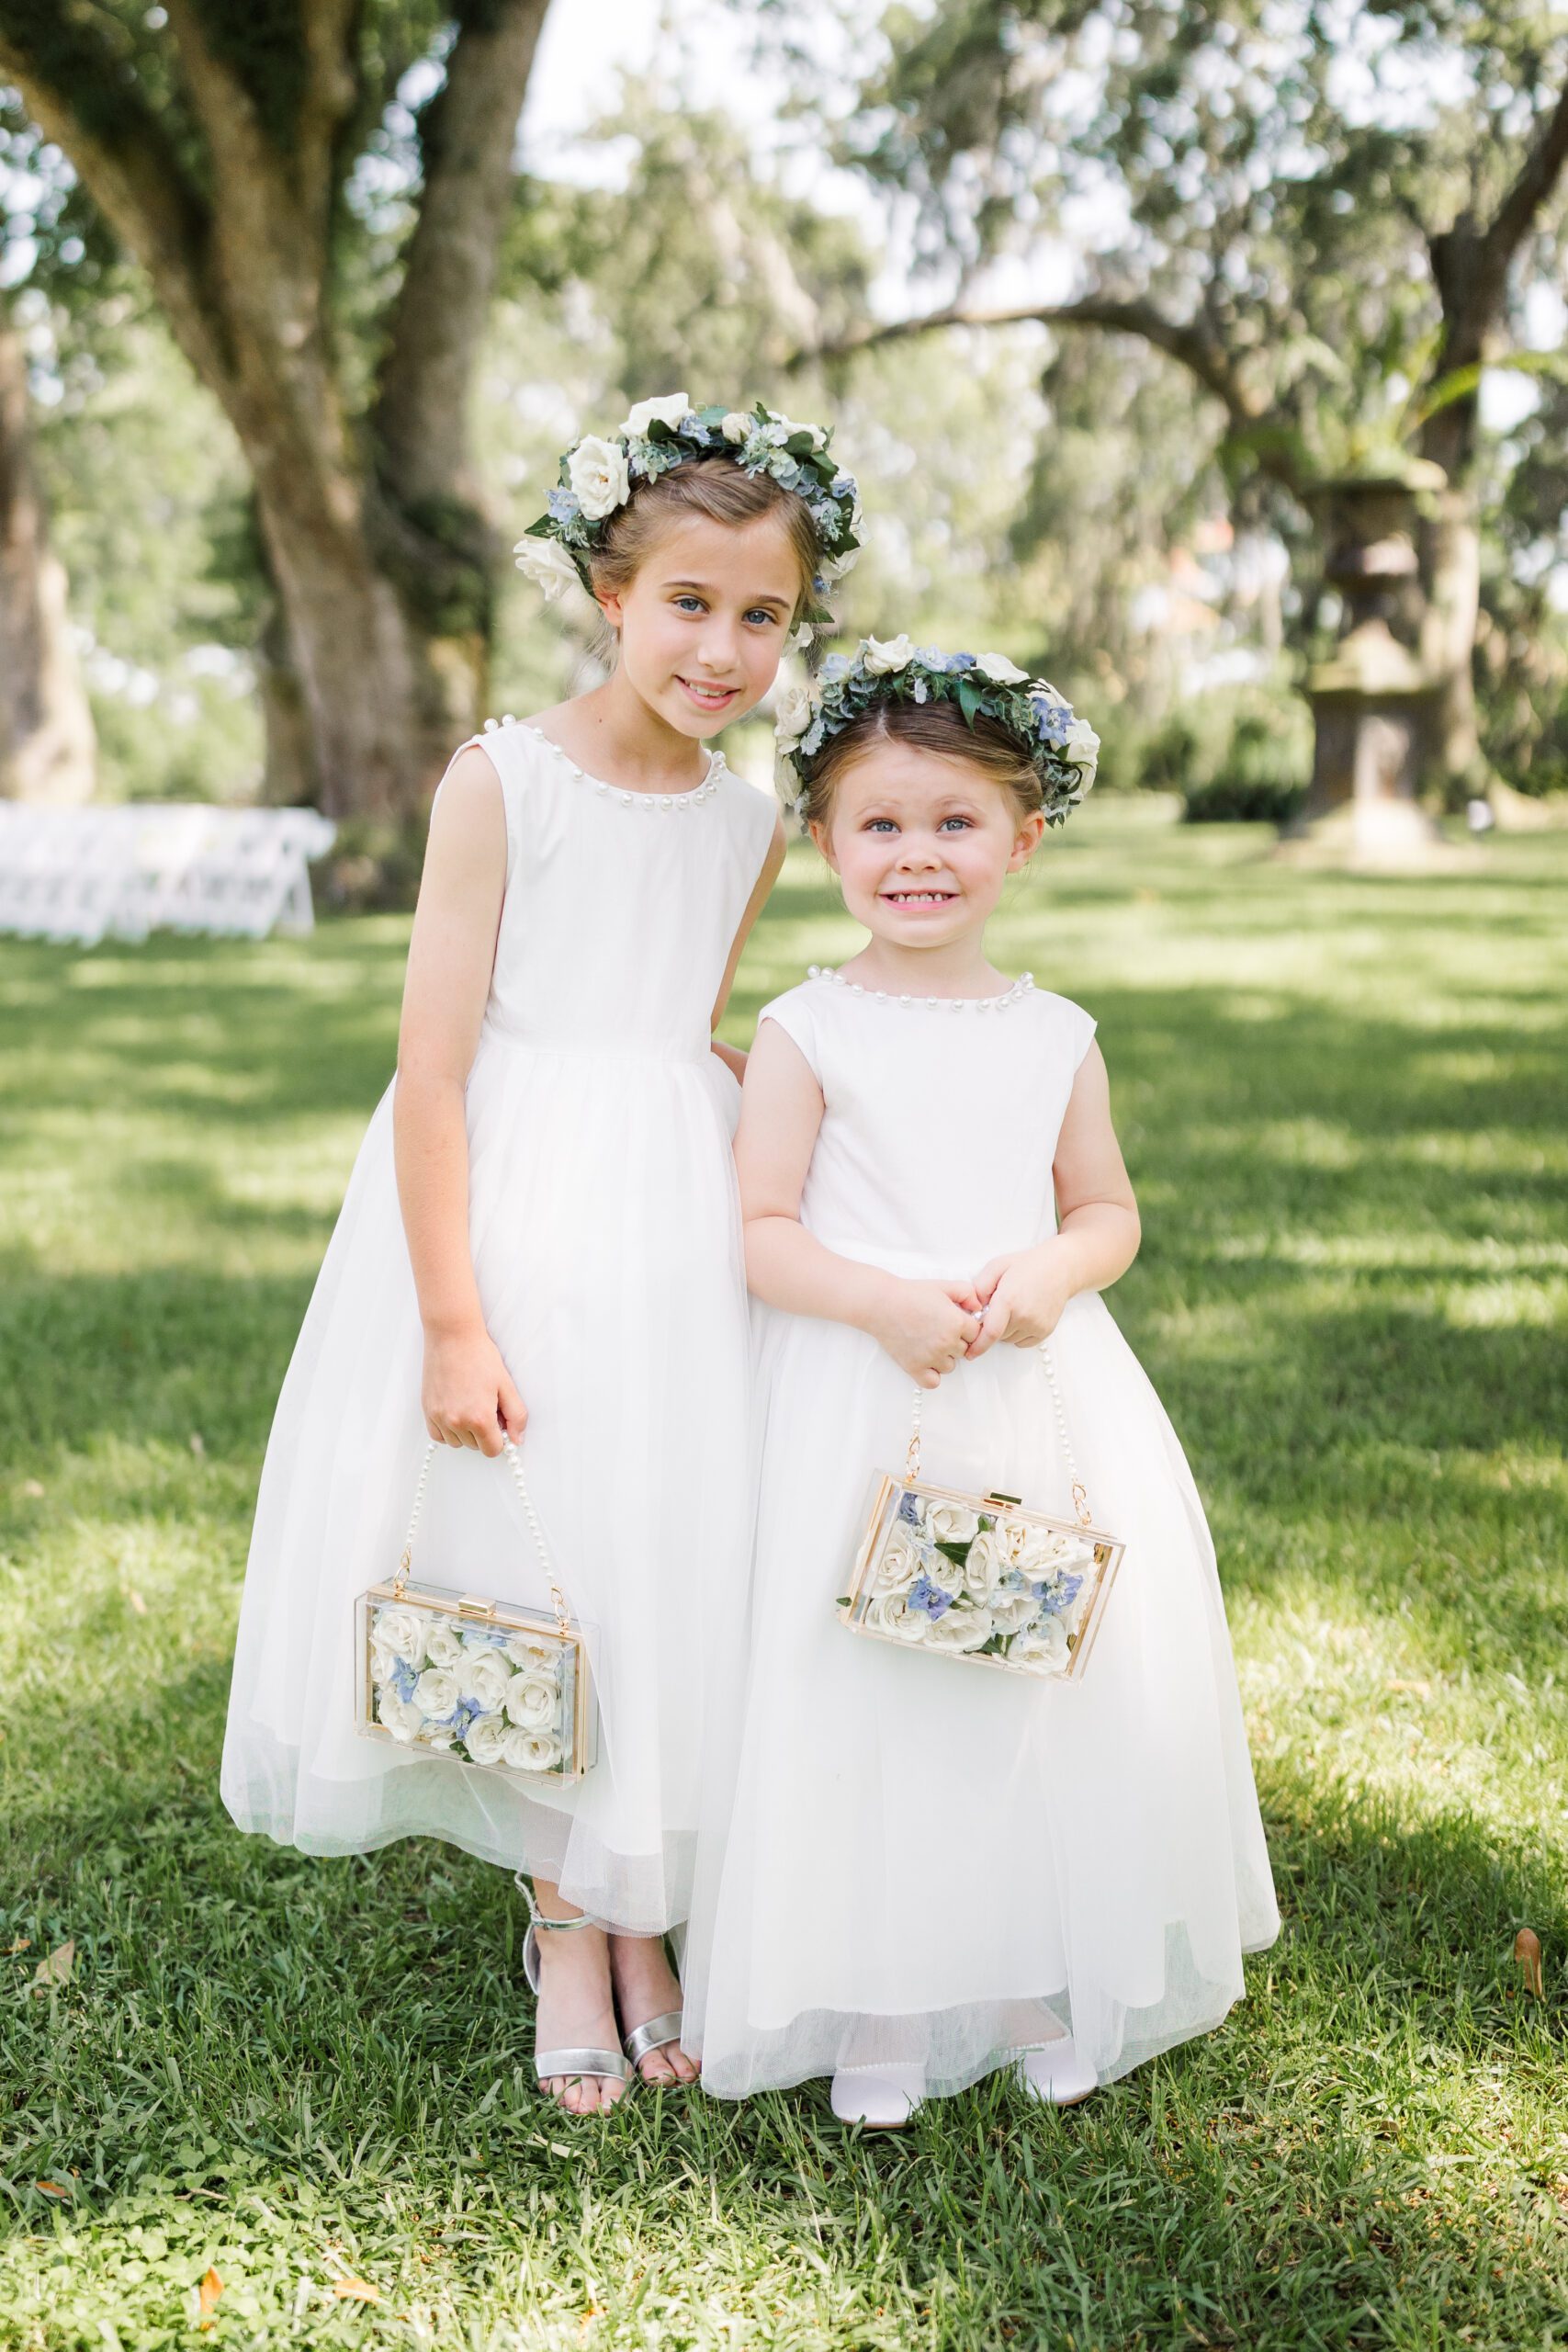 6 Foolproof Tips for Getting Your Flower Girl or Ring Bearer Down the Aisle